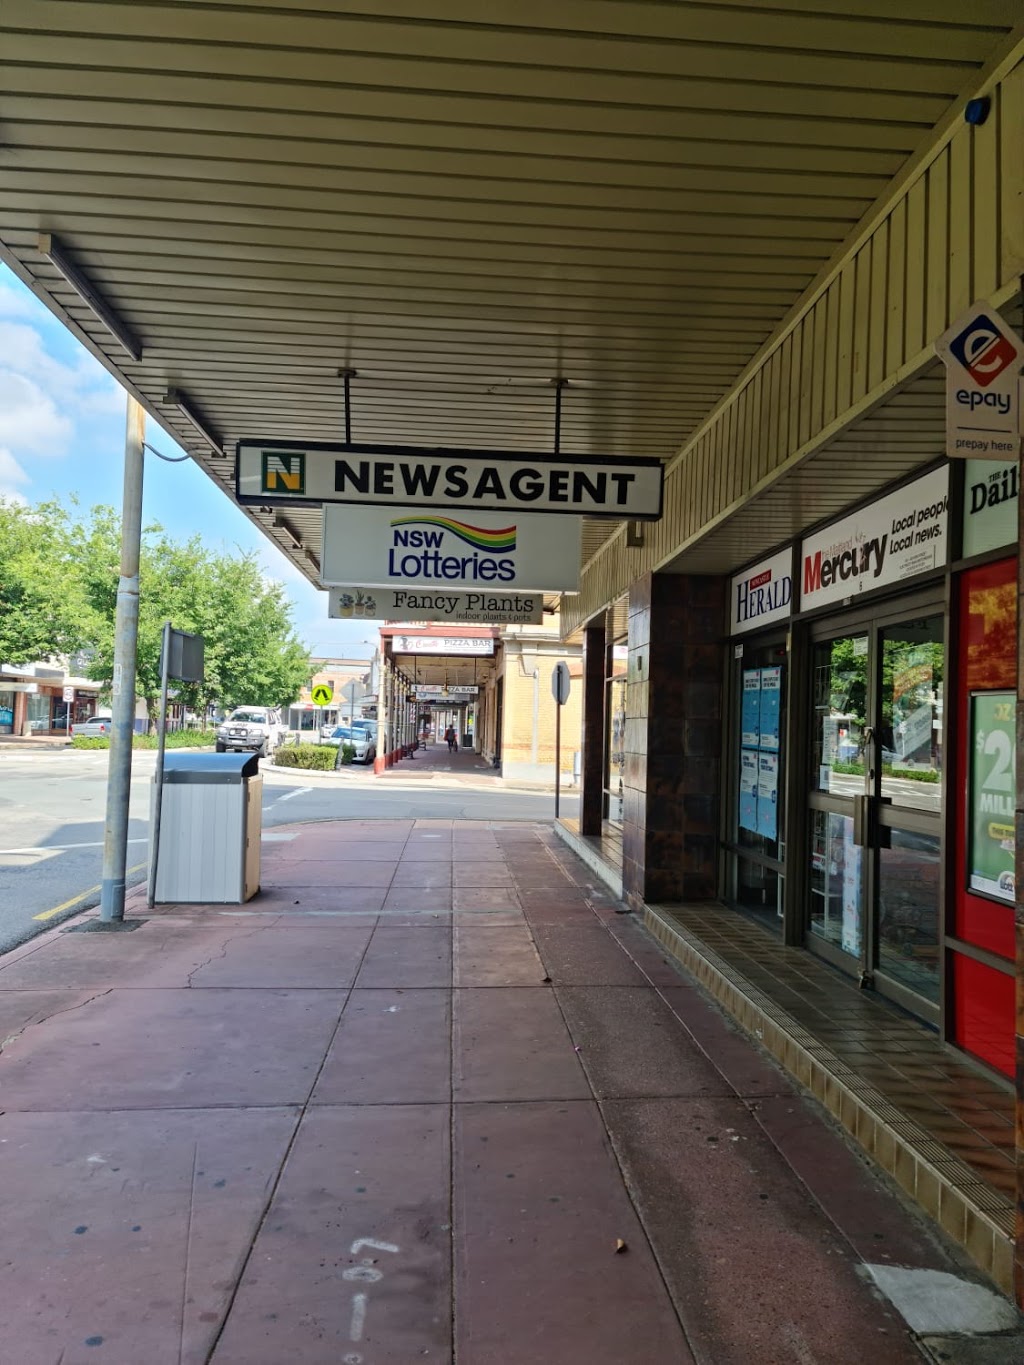 Maitland West End Newsagency | book store | 493 High St, Maitland NSW 2320, Australia | 0249336634 OR +61 2 4933 6634